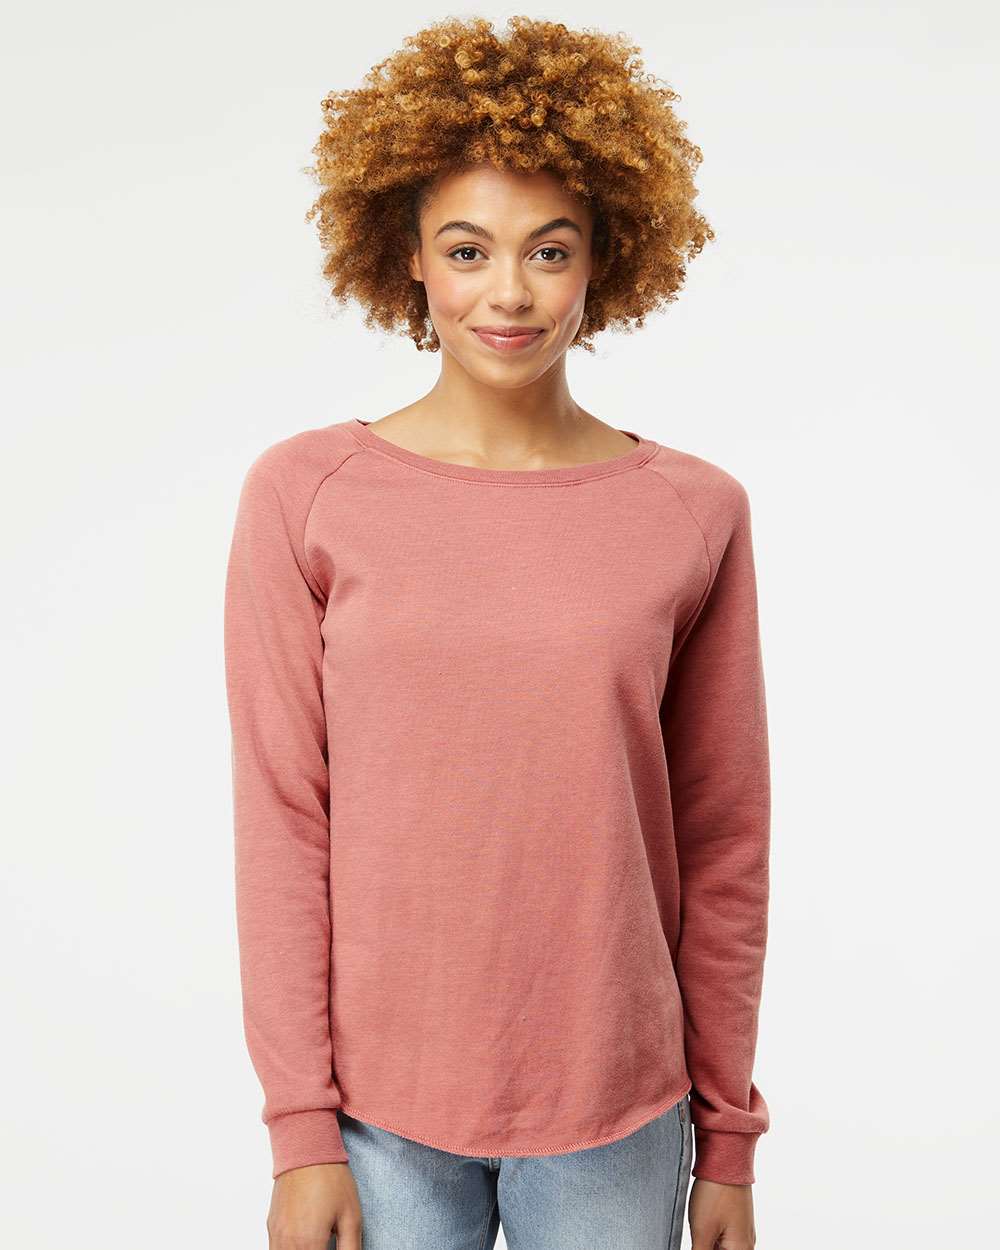 Independent Trading Co. Women's California Wave Wash Crewneck Sweatshirt PRM2000 #colormdl_Dusty Rose